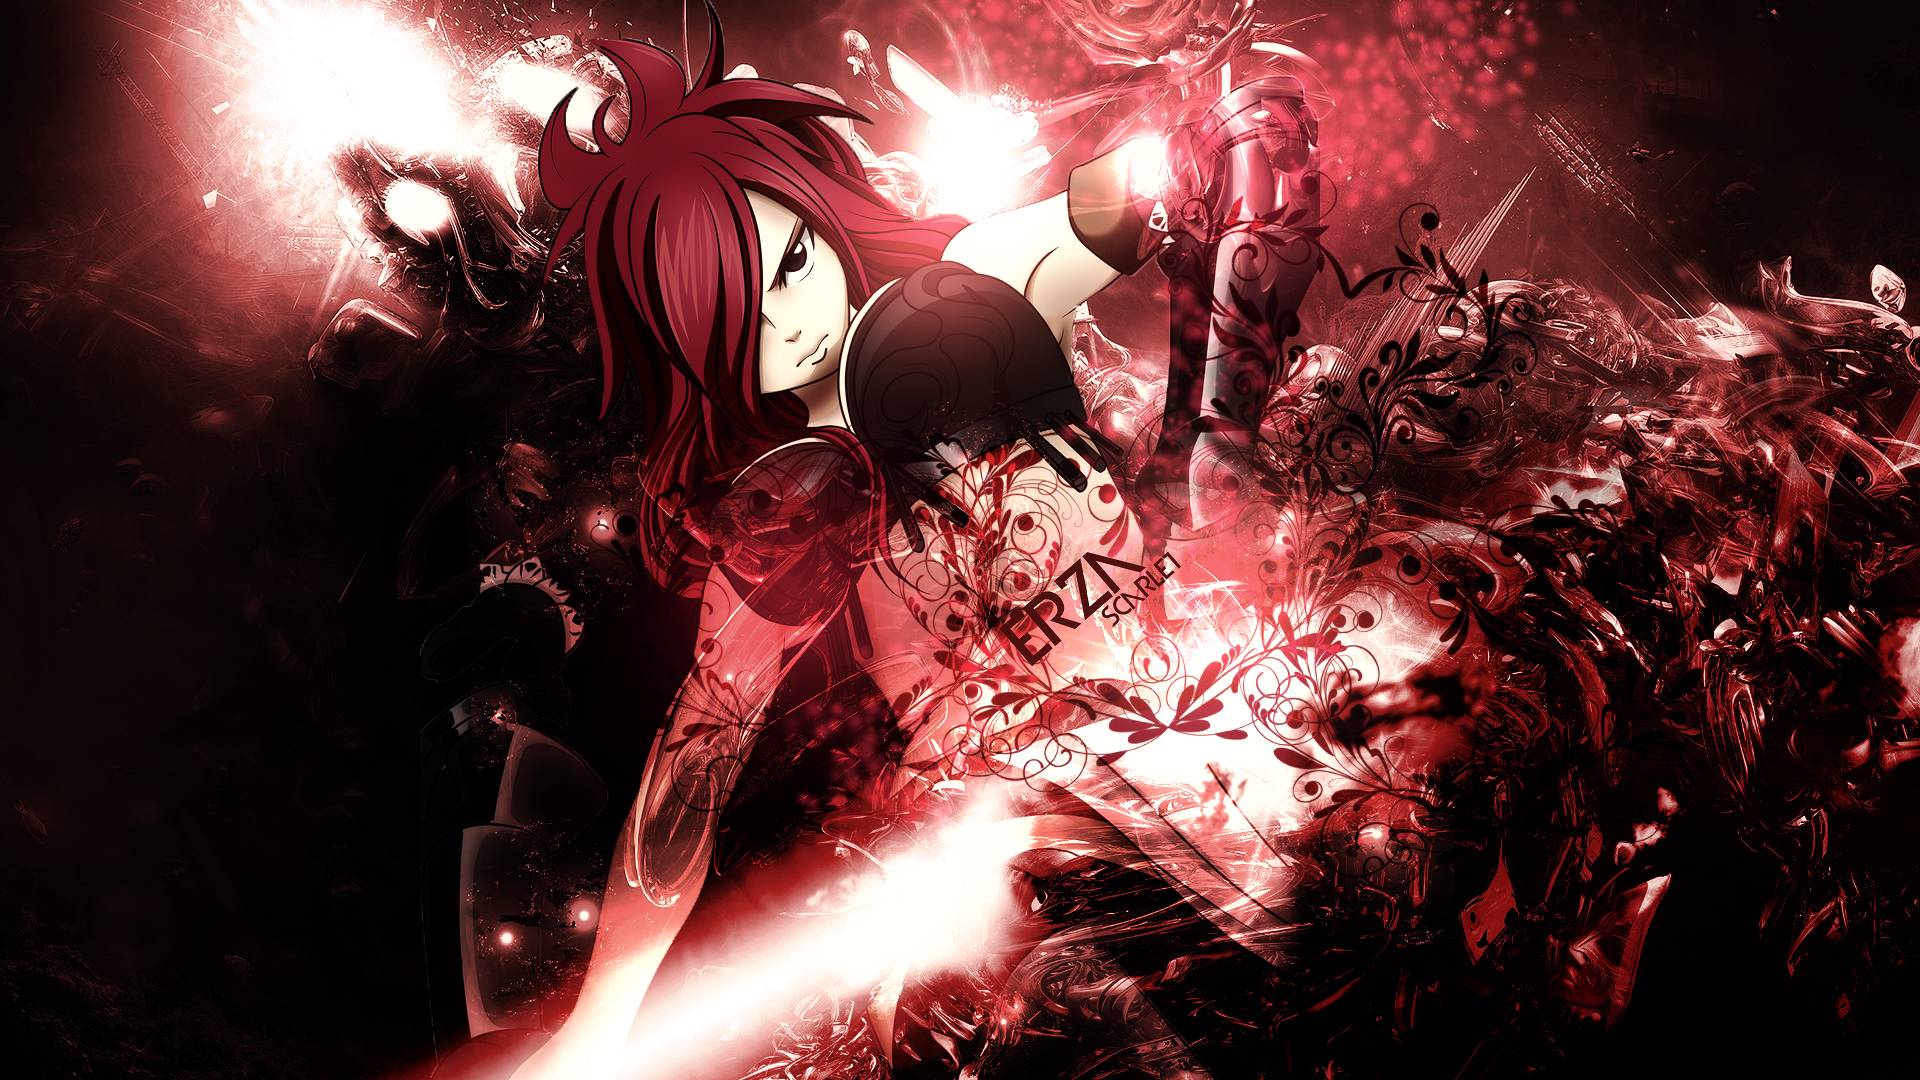 Fairy Tail Wallpapers Hd Erza Image & Pictures